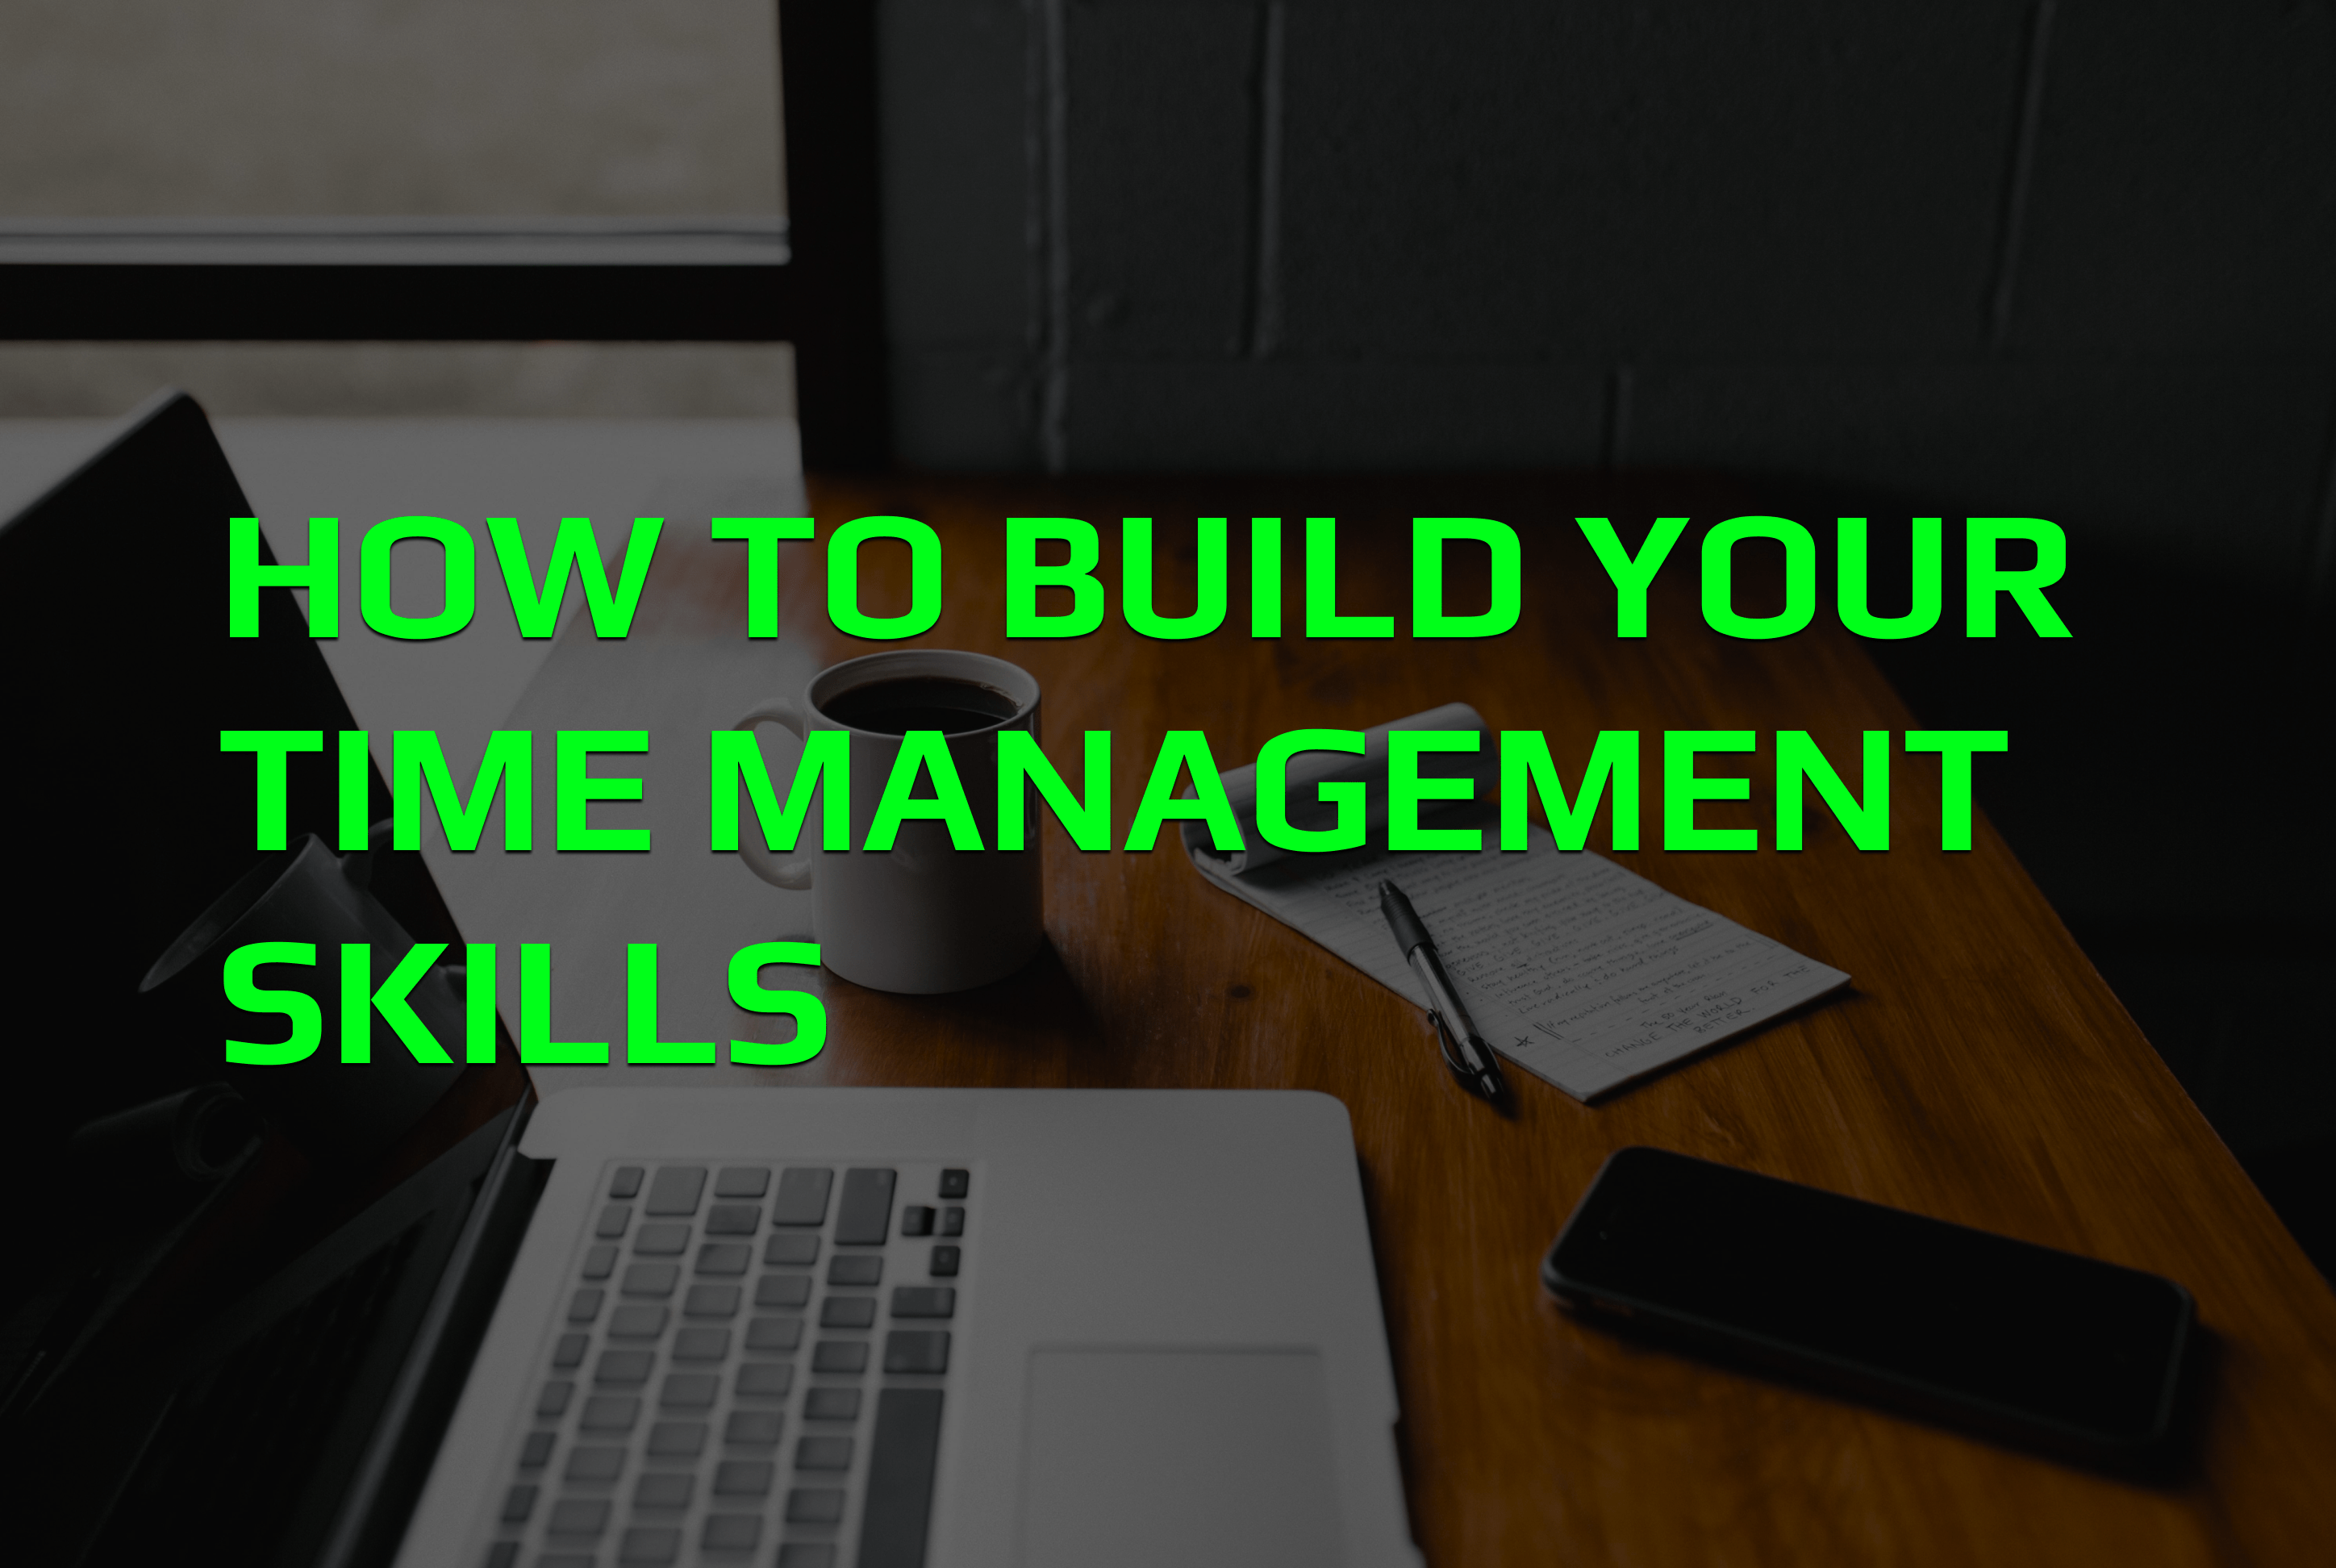 How to build your time management skills